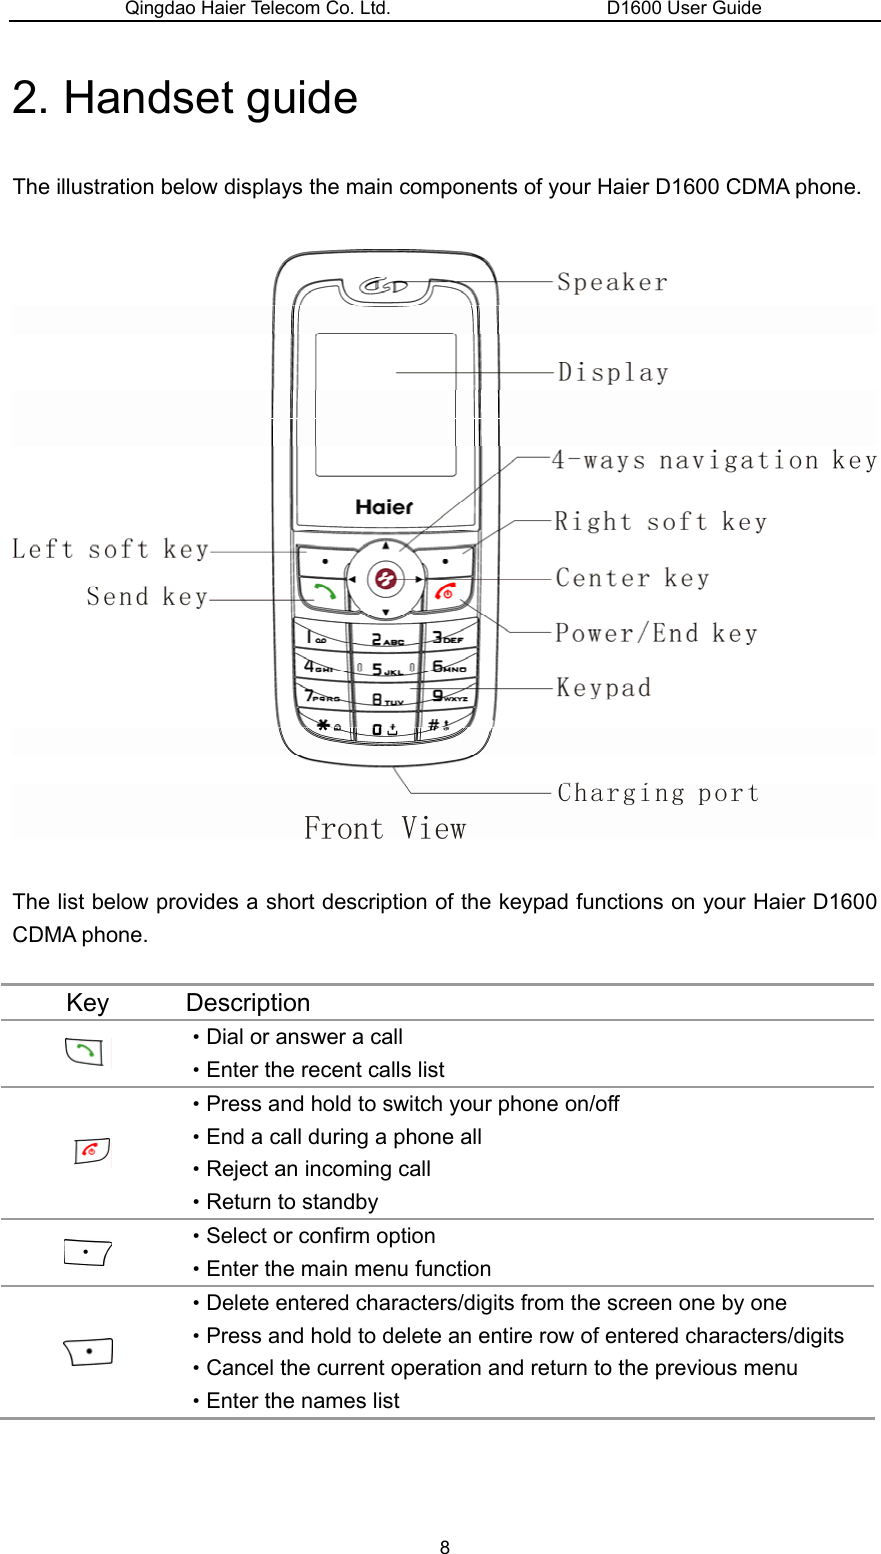 Qingdao Haier Telecom Co. Ltd.                       D1600 User Guide 2. Handset guide The illustration below displays the main components of your Haier D1600 CDMA phone.    The list below provides a short description of the keypad functions on your Haier D1600 CDMA phone.  Key Description  ·Dial or answer a call ·Enter the recent calls list  ·Press and hold to switch your phone on/off ·End a call during a phone all ·Reject an incoming call ·Return to standby  ·Select or confirm option ·Enter the main menu function  ·Delete entered characters/digits from the screen one by one ·Press and hold to delete an entire row of entered characters/digits ·Cancel the current operation and return to the previous menu ·Enter the names list 8 